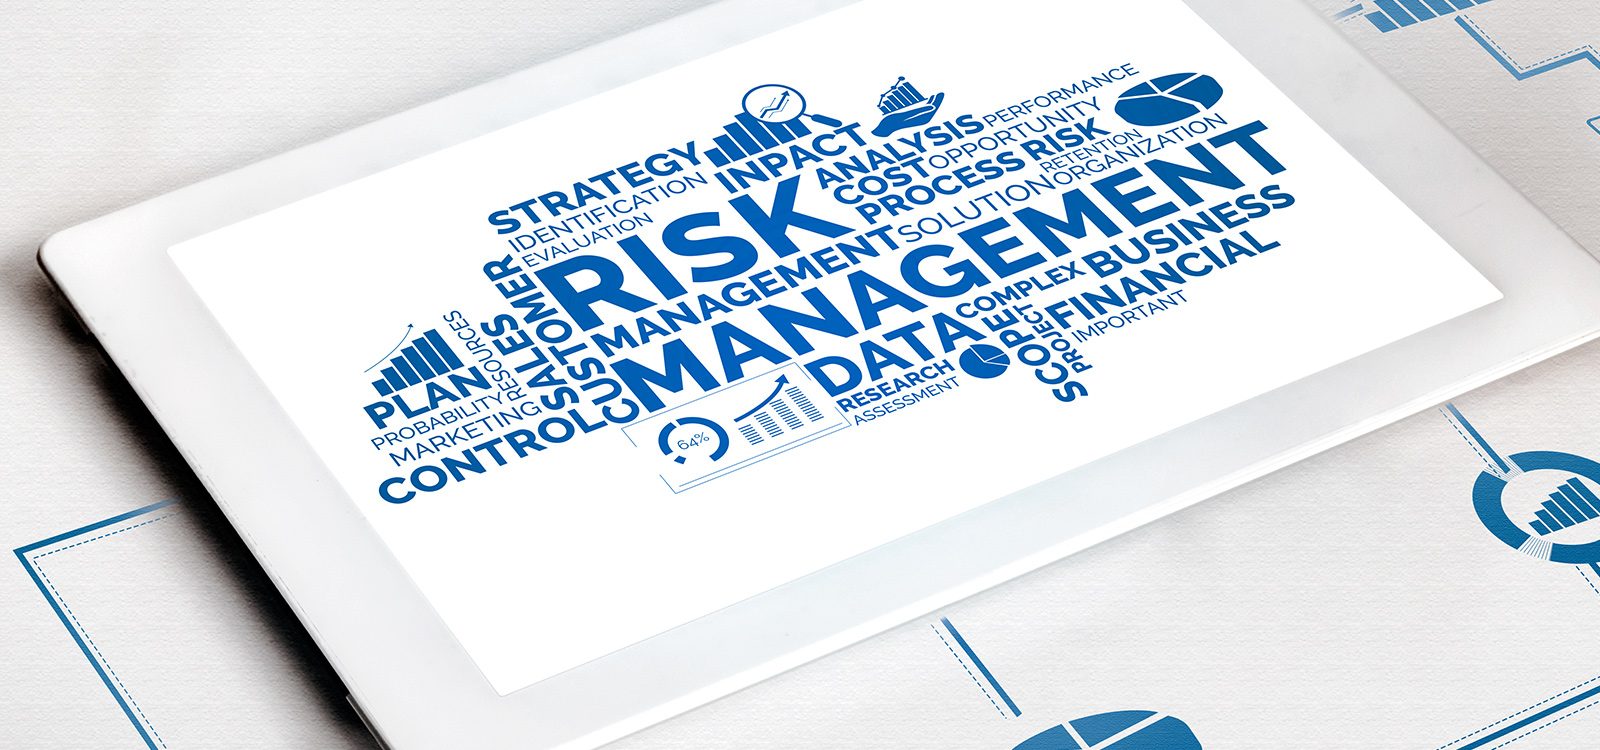 What’s ‘hot right now’ in risk management?